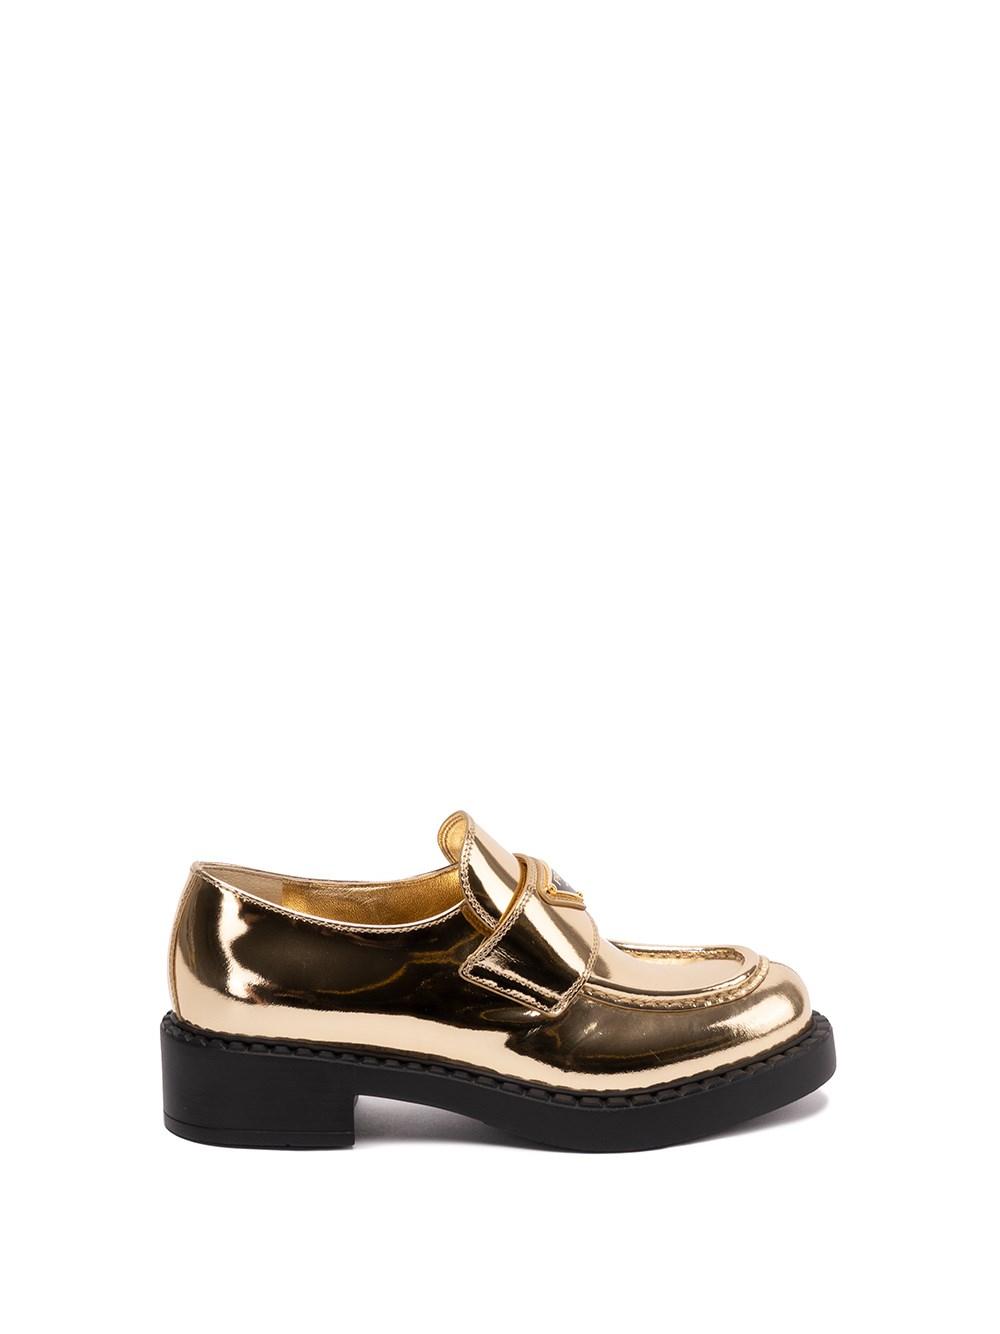 Prada `chocolate` Metallic Leather Loafers in White | Lyst